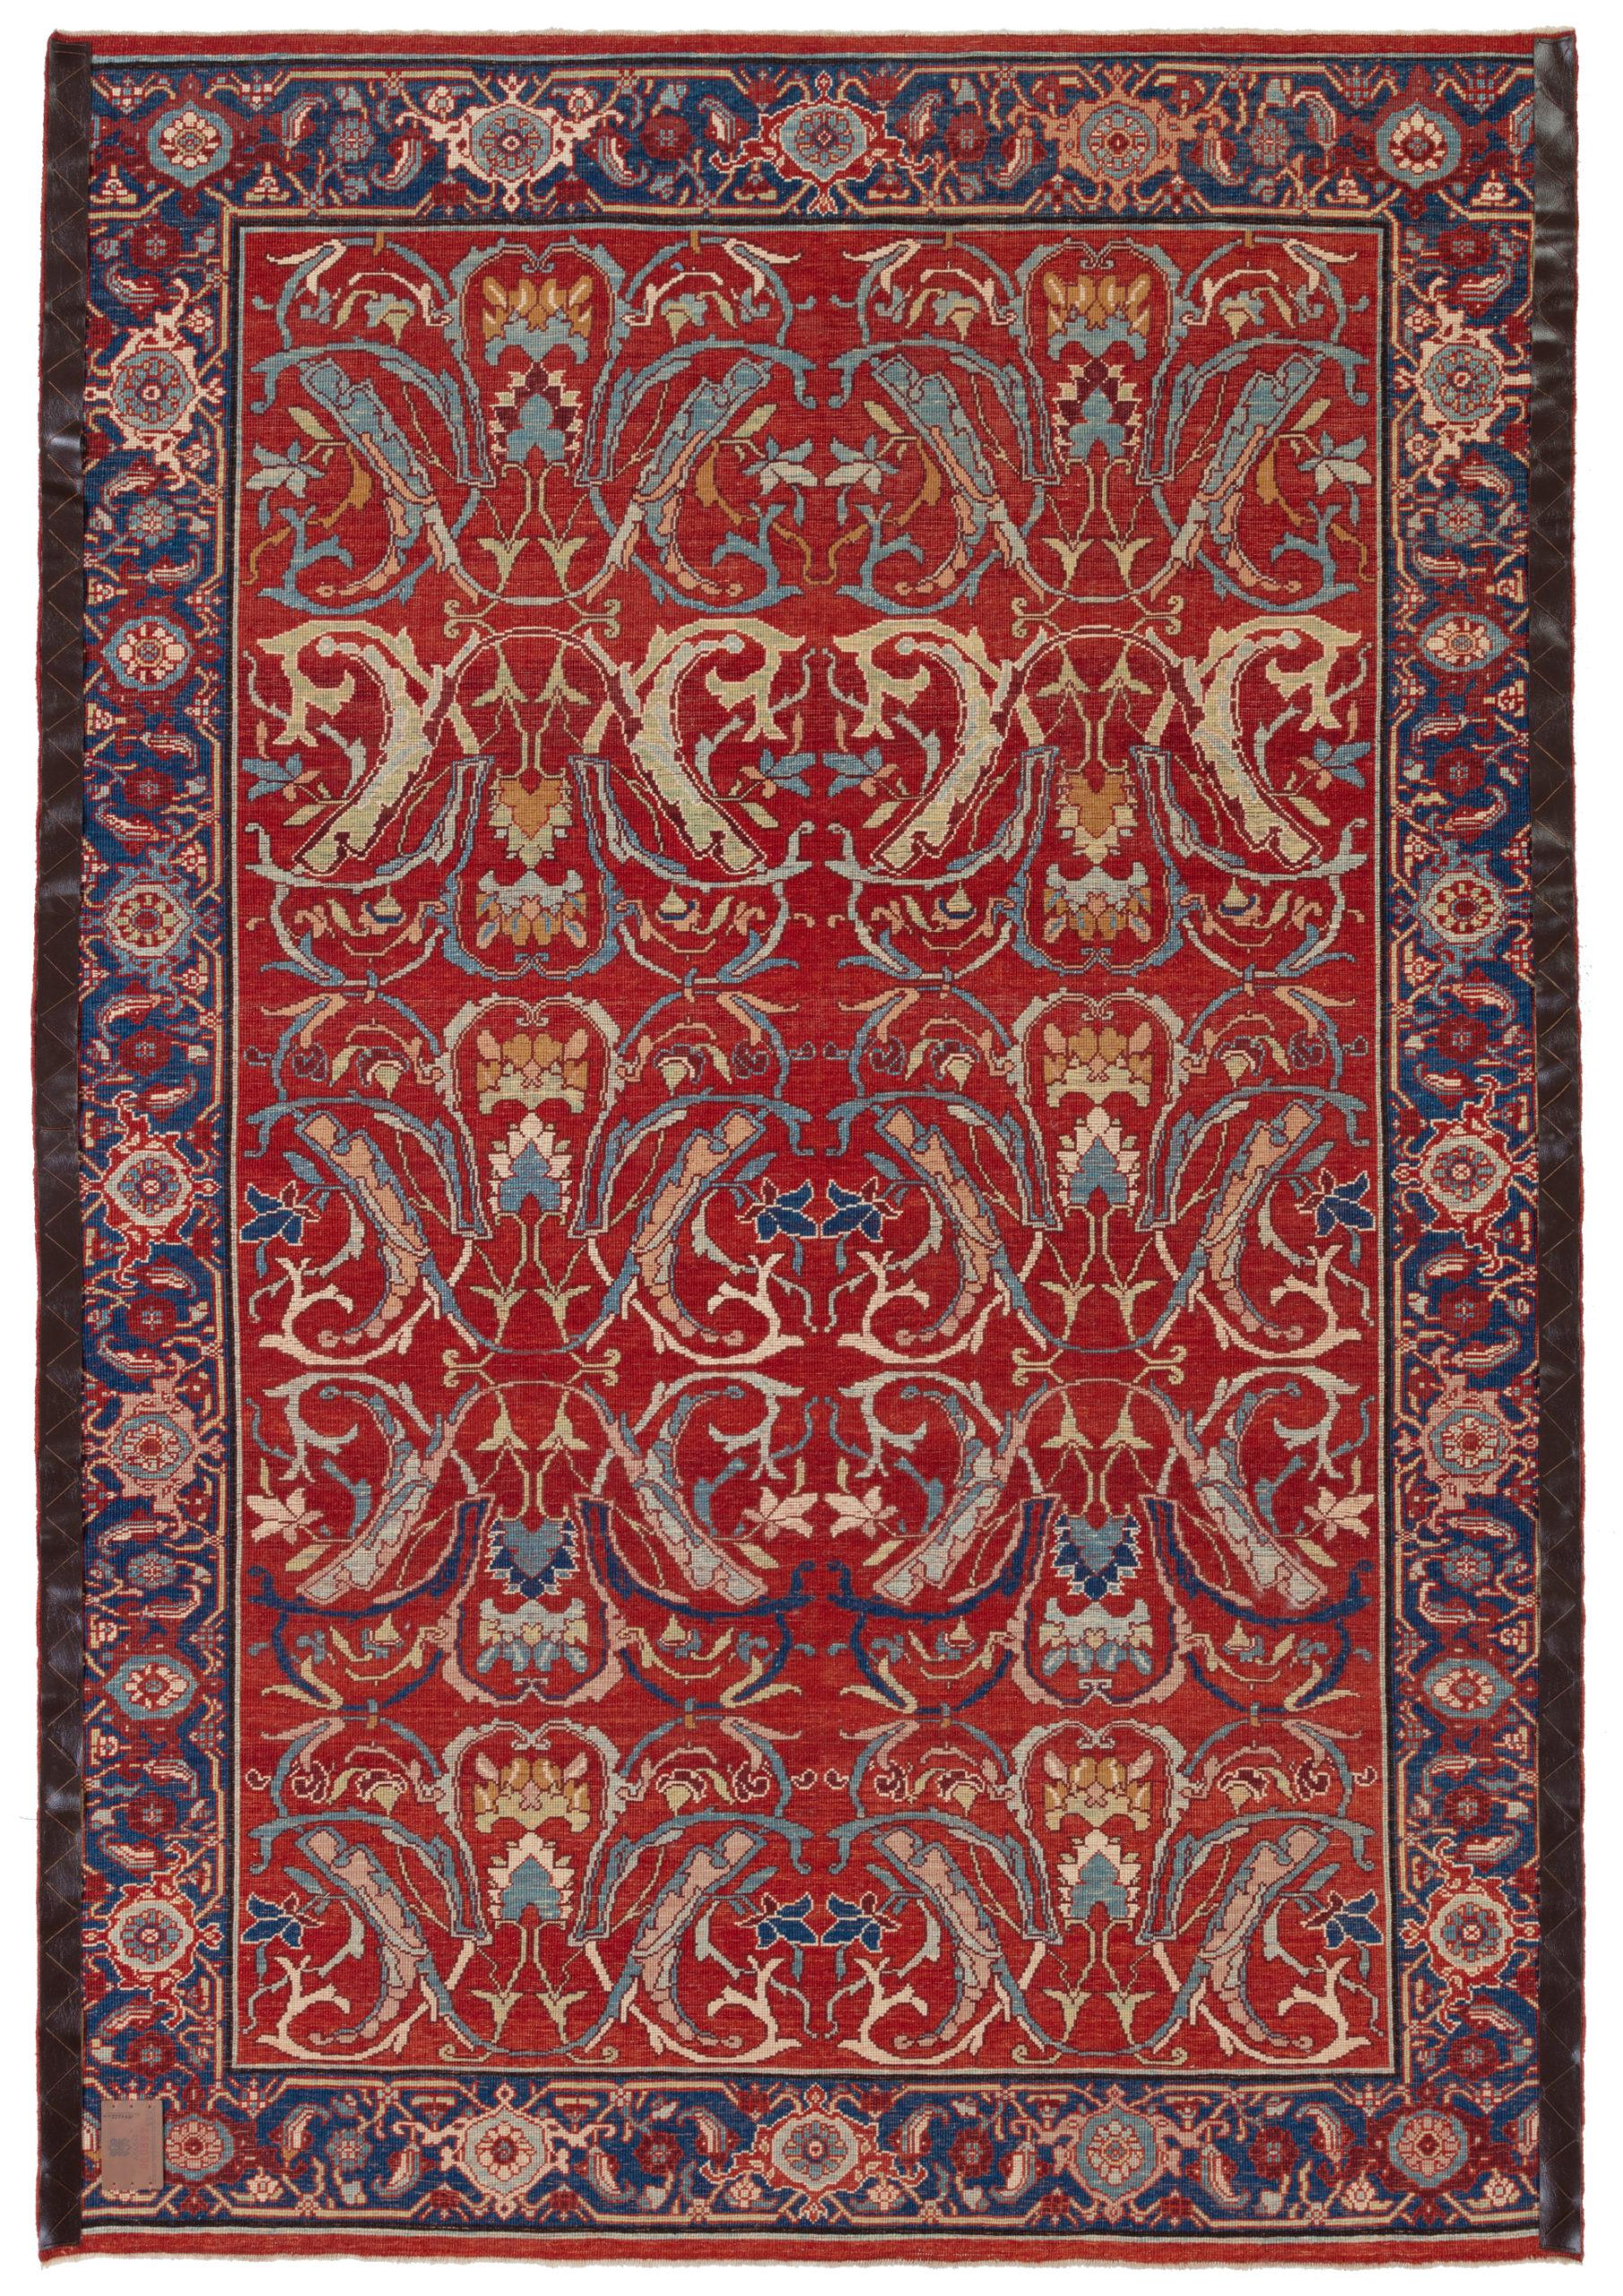 This is a repeat of large sweeping arabesques in muted colors adorning the red field rug designed in the early 20th century that originates from the Bidjar region in northwestern Iran. Bidjar rugs, in general, are renowned for their exceptional